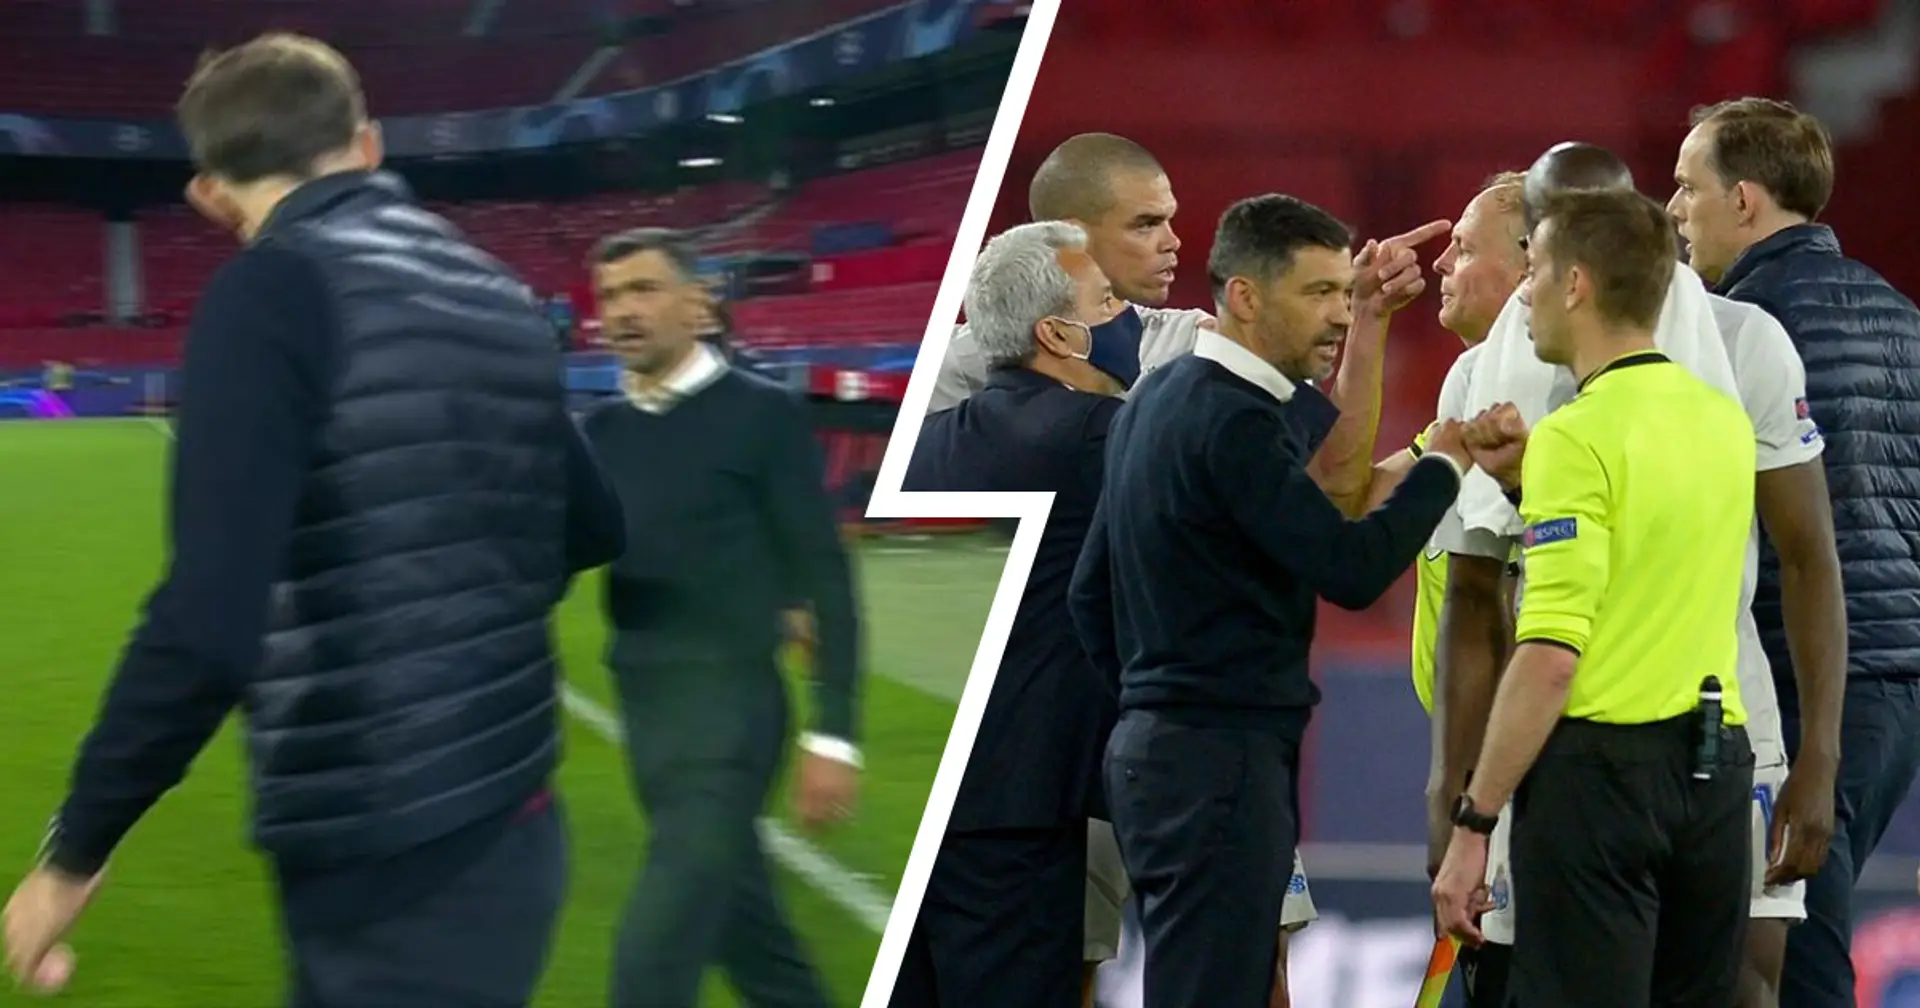 Tuchel allegedly told Porto boss to 'f*** off' before post-game bust-up between teams